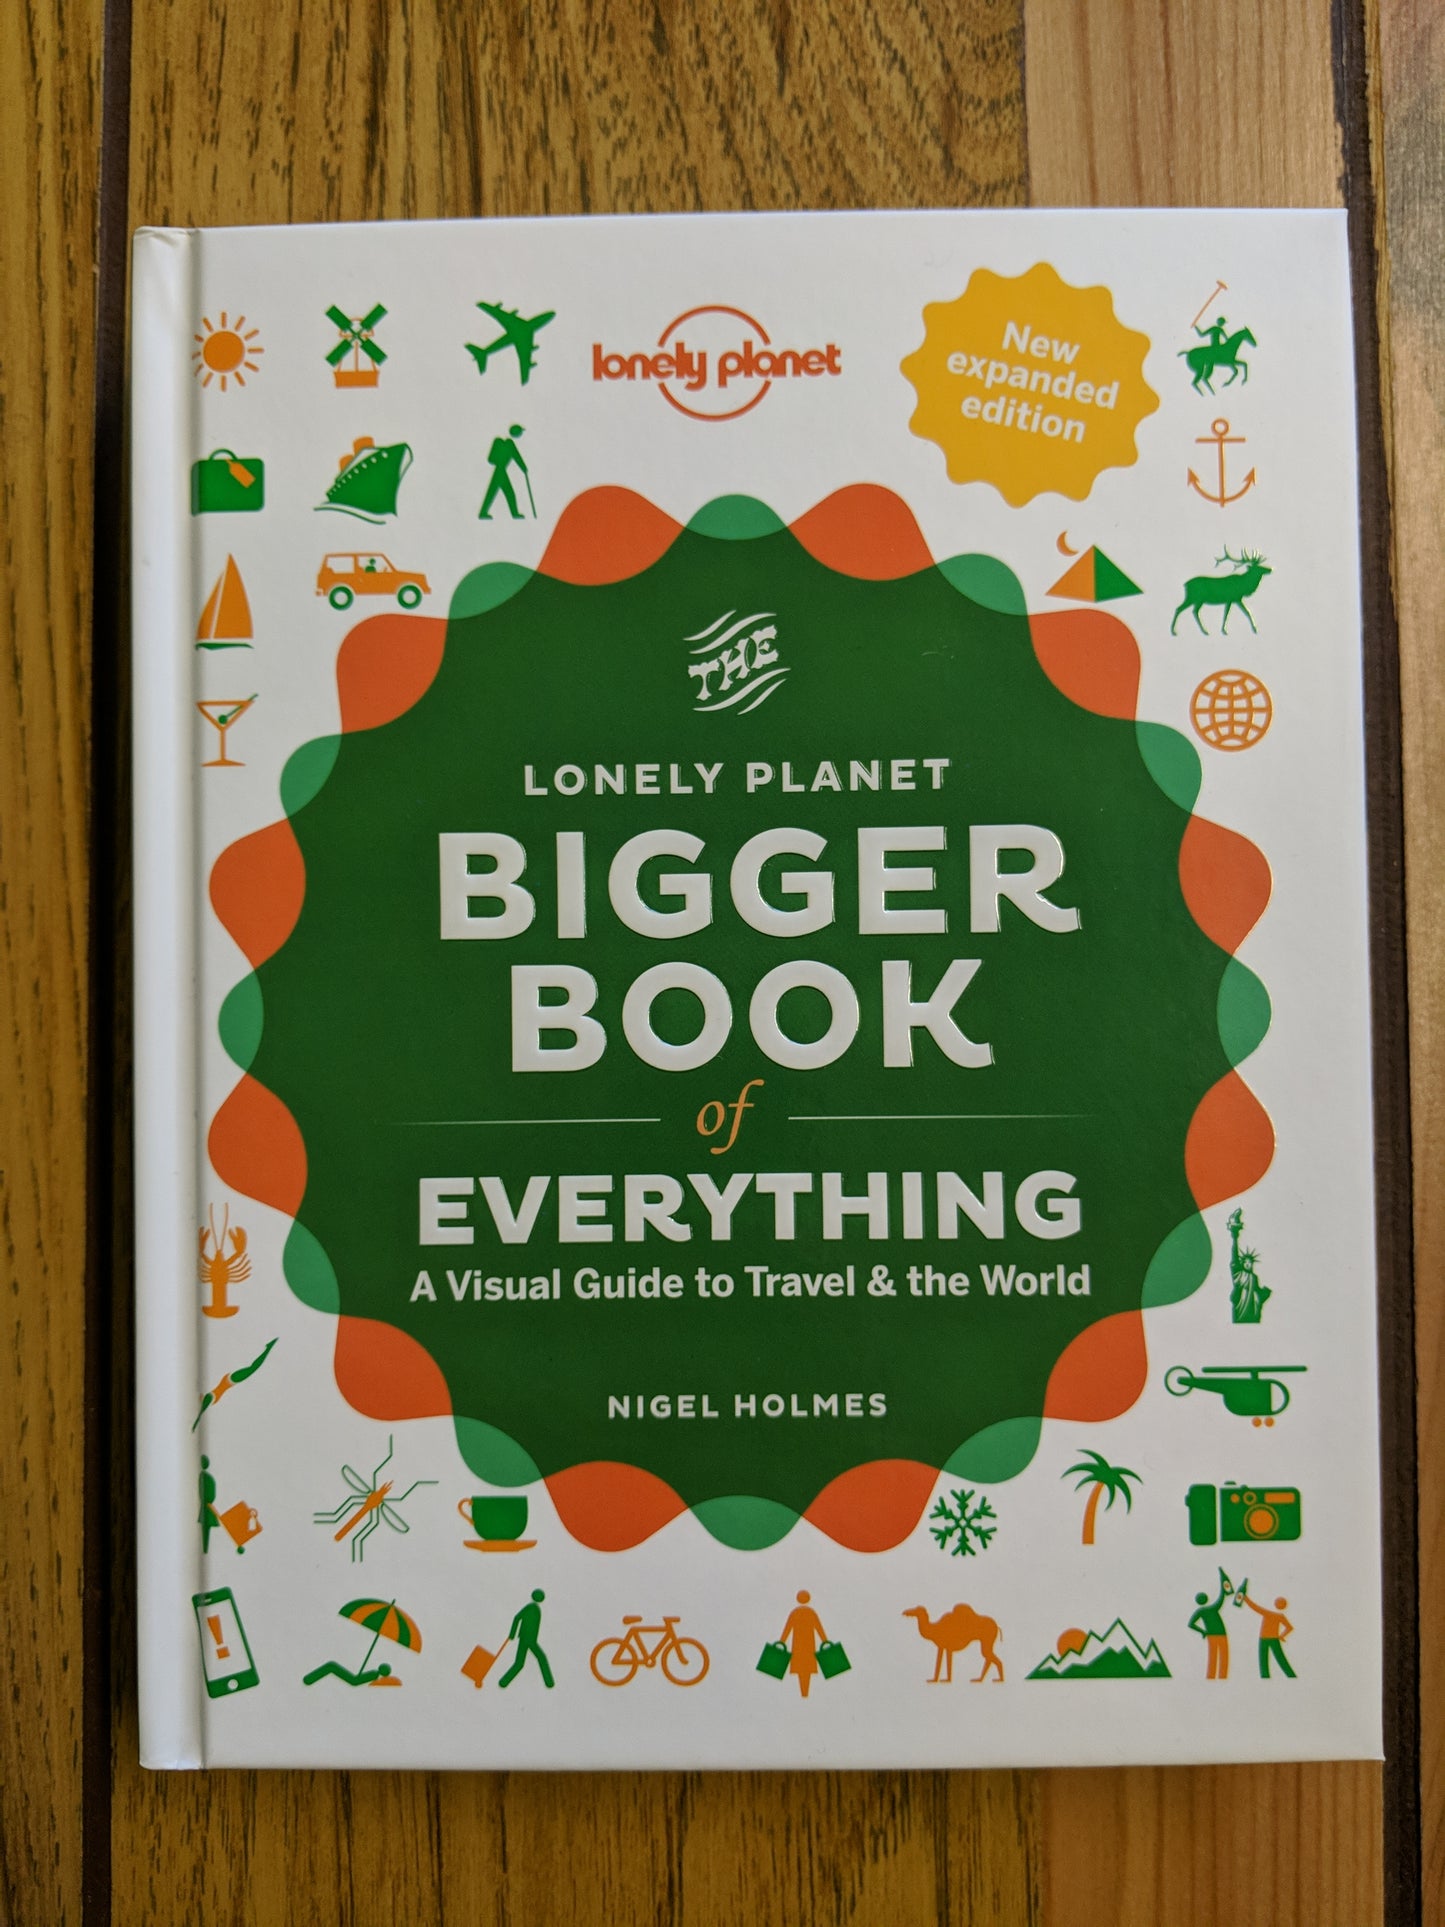 The Bigger Book of Everything